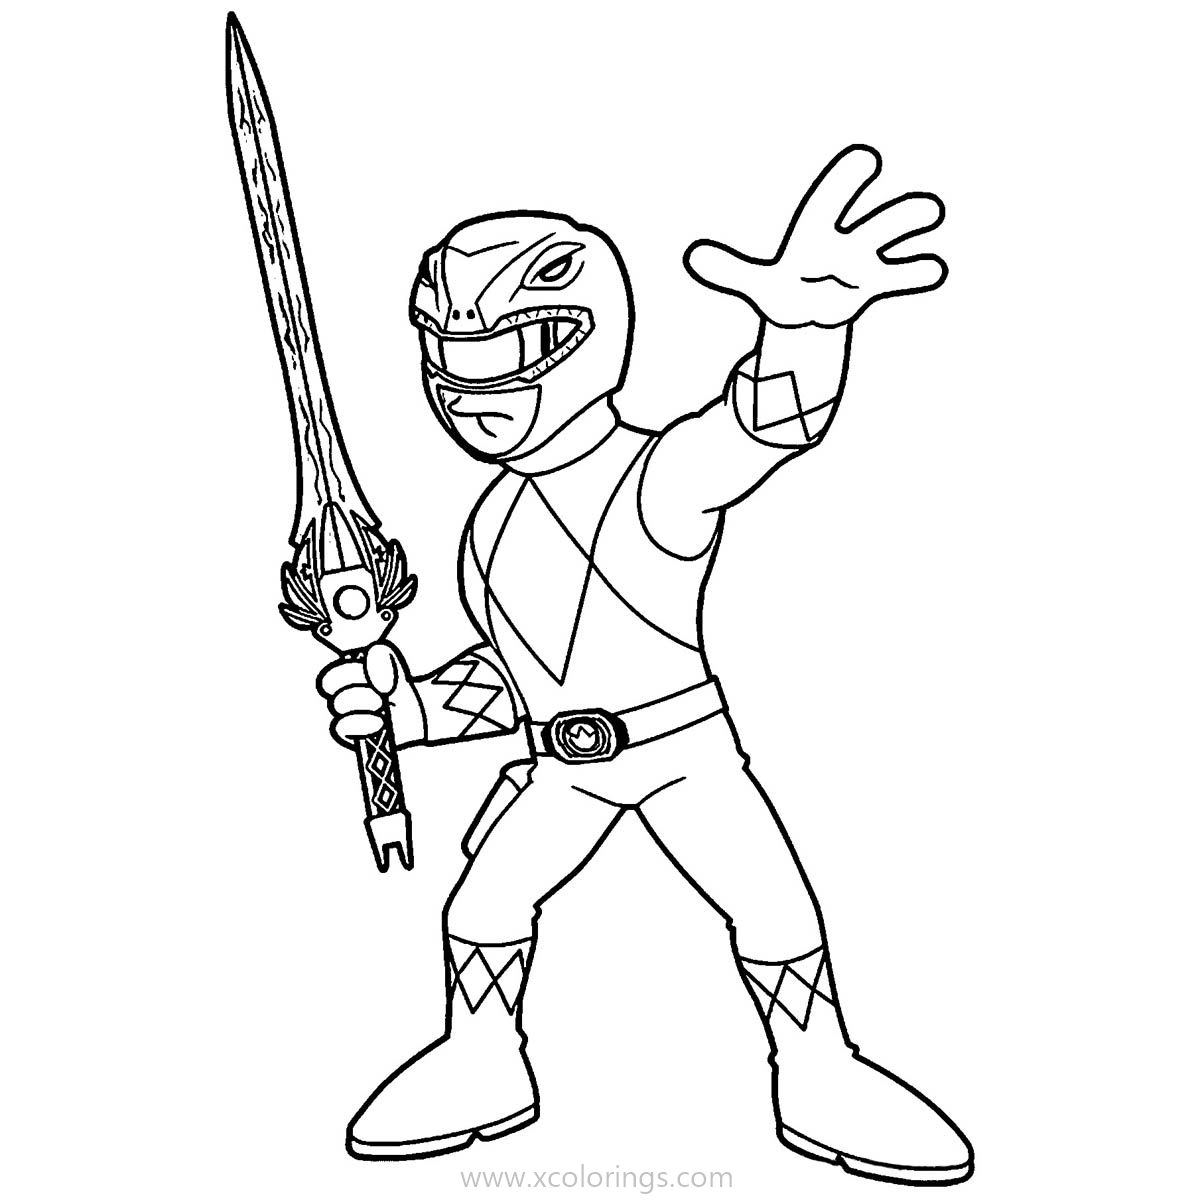 Free Power Rangers Dino Charge Coloring Pages Ranger with Sword printable